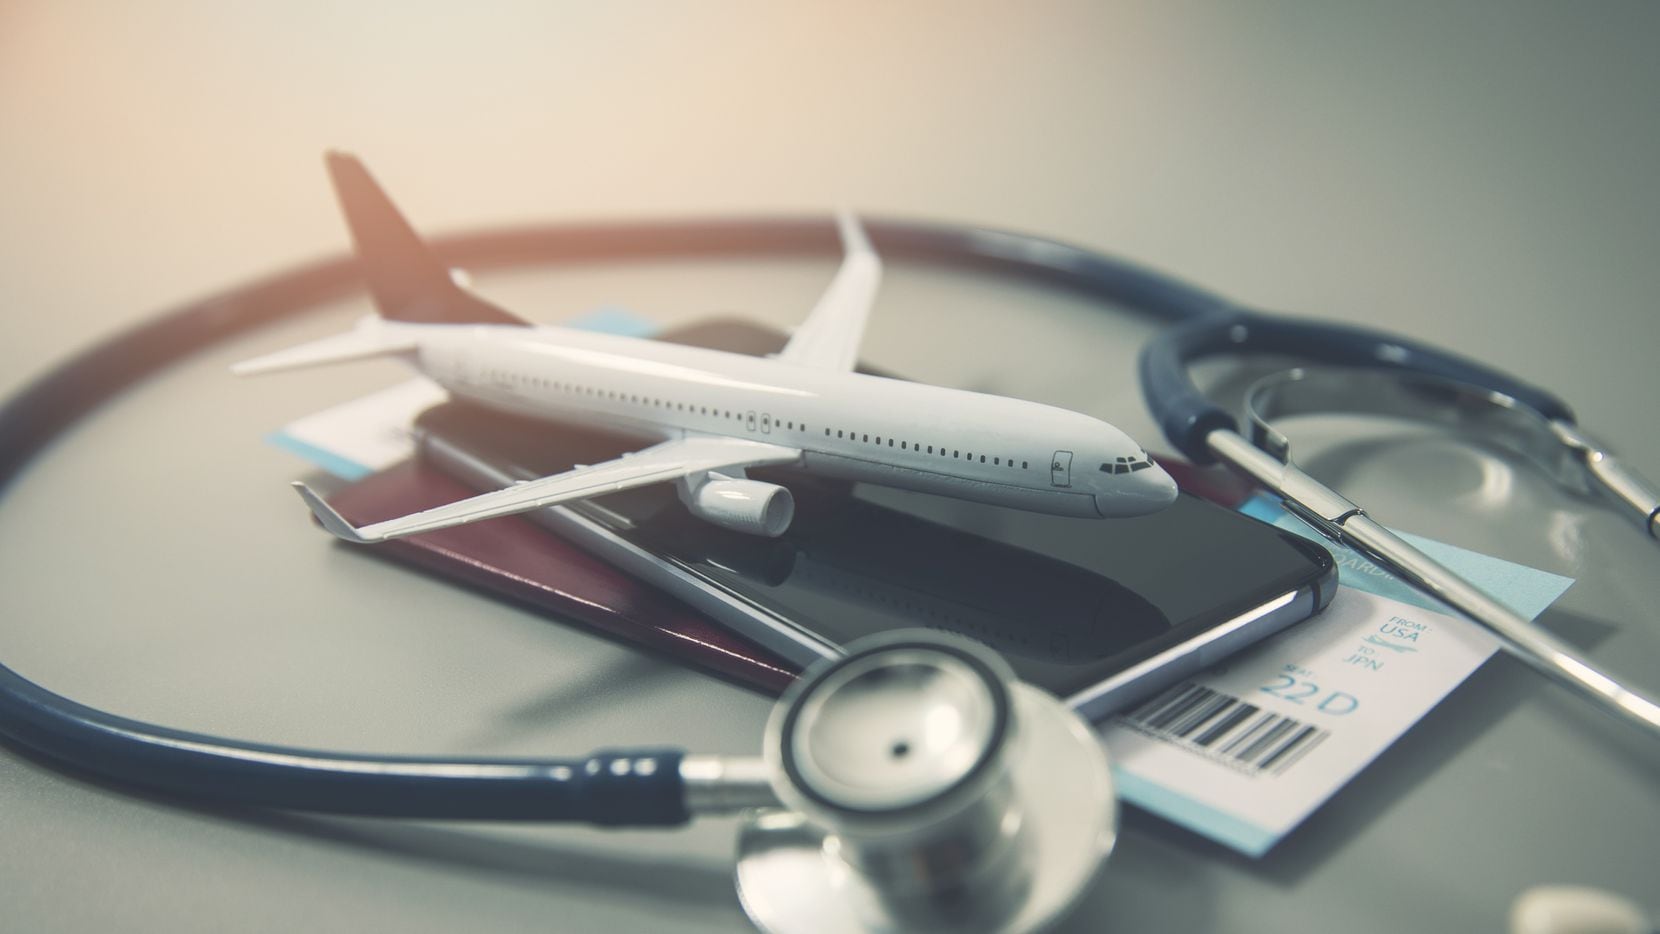 Medical tourism: what are the risks and how to minimize them?